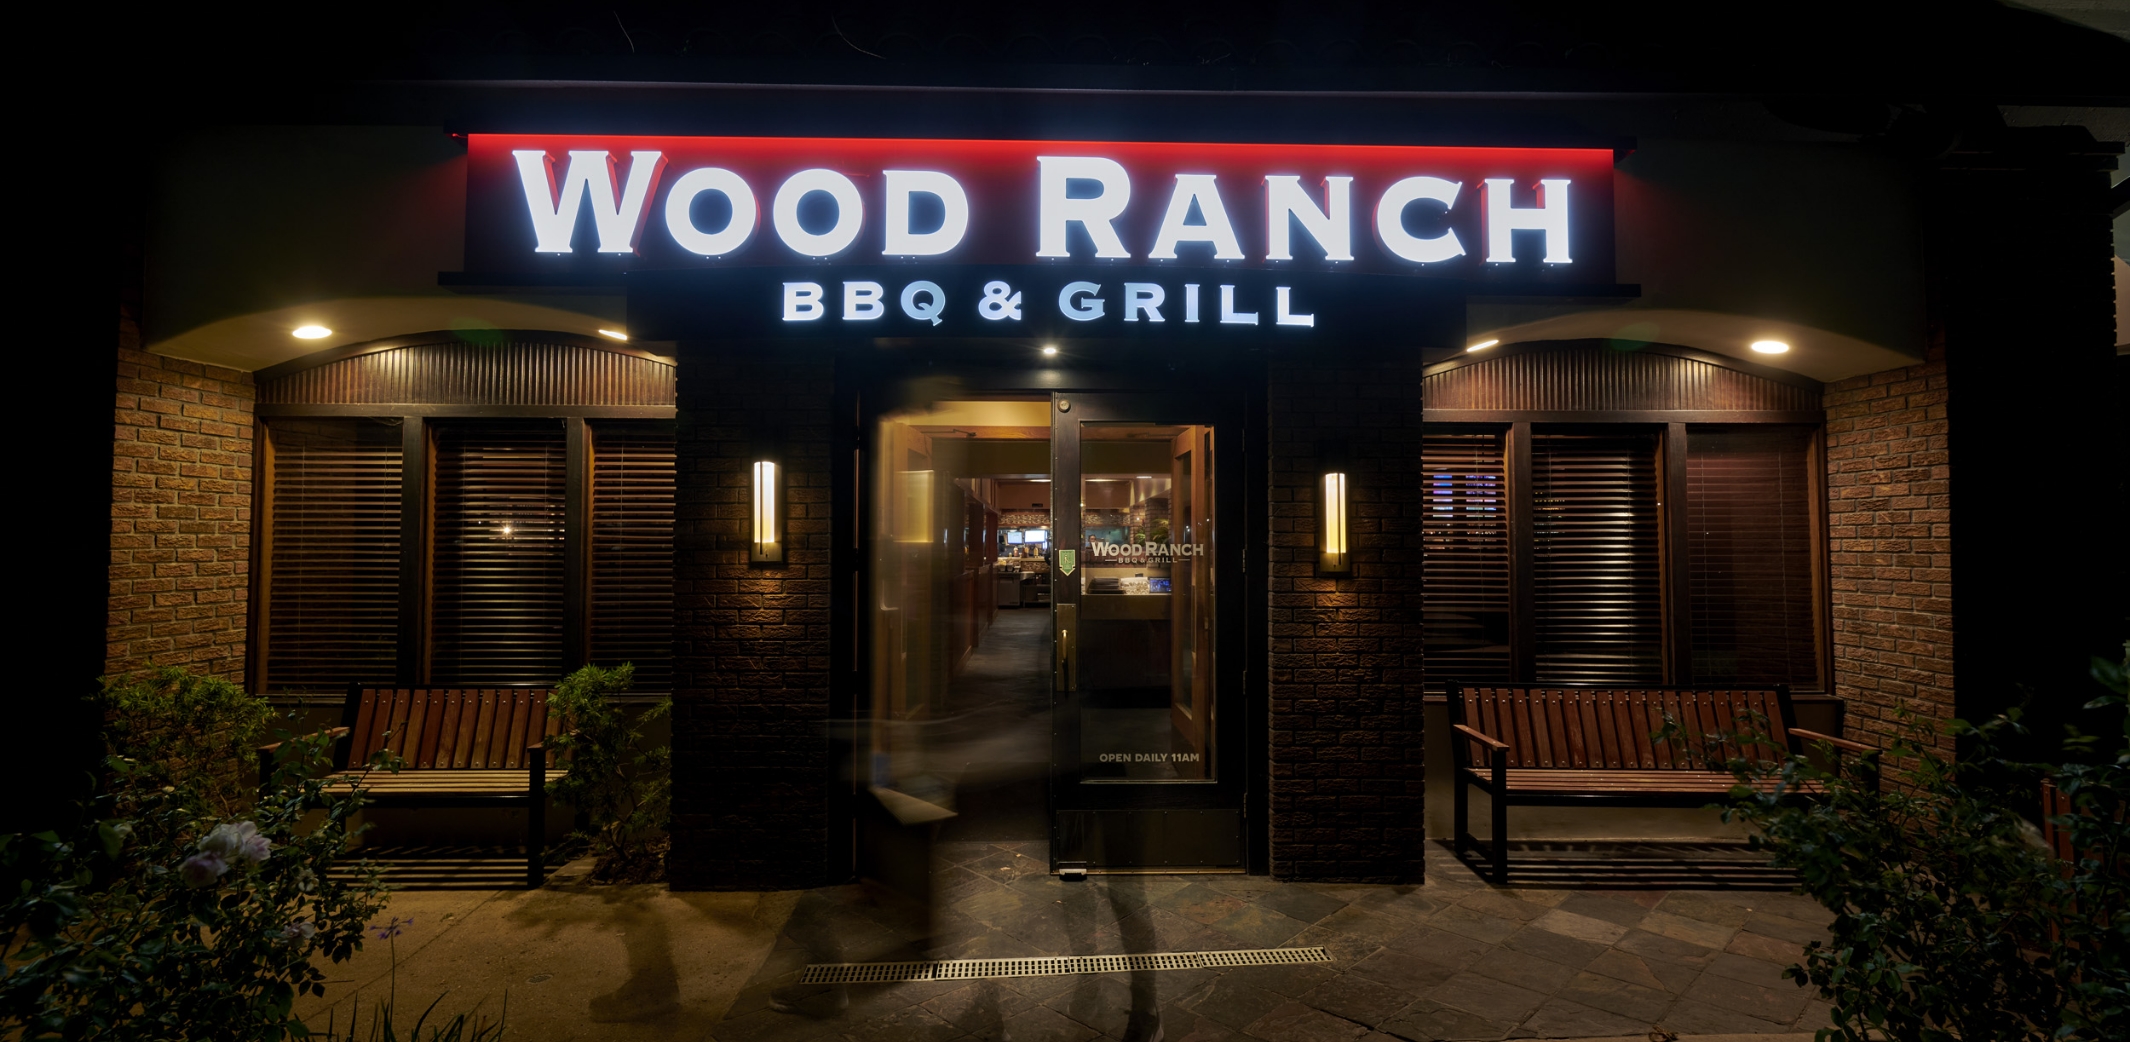 Night view of Wood Ranch BBQ & Grill' Camarillo's inviting entrance, with its neon sign, warm interior lighting, and lush plants framing the doorway.